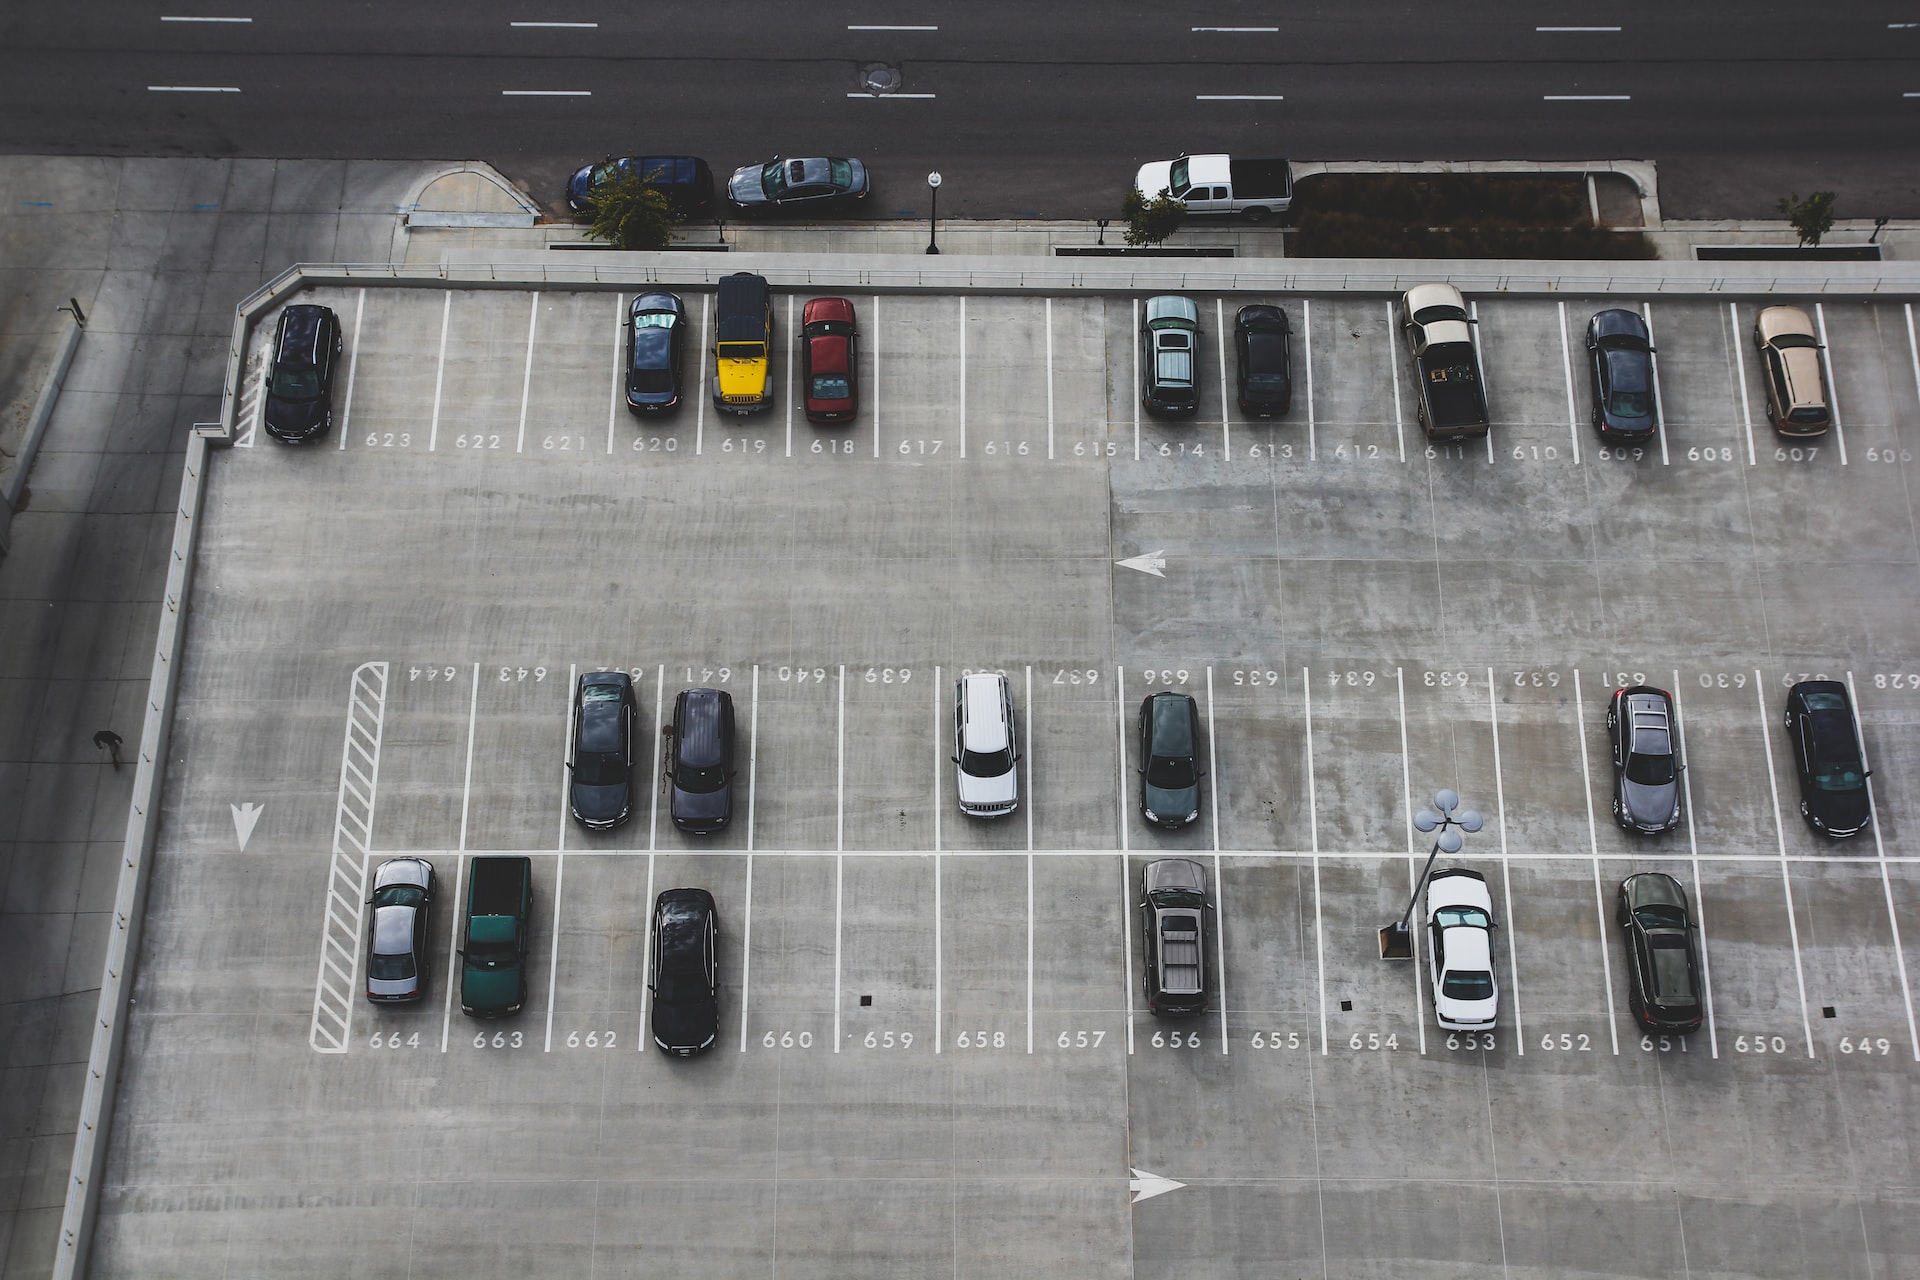 Aerial view of a spacious open parking lot, with 21 vehicles parked on white-painted numbered parking slots